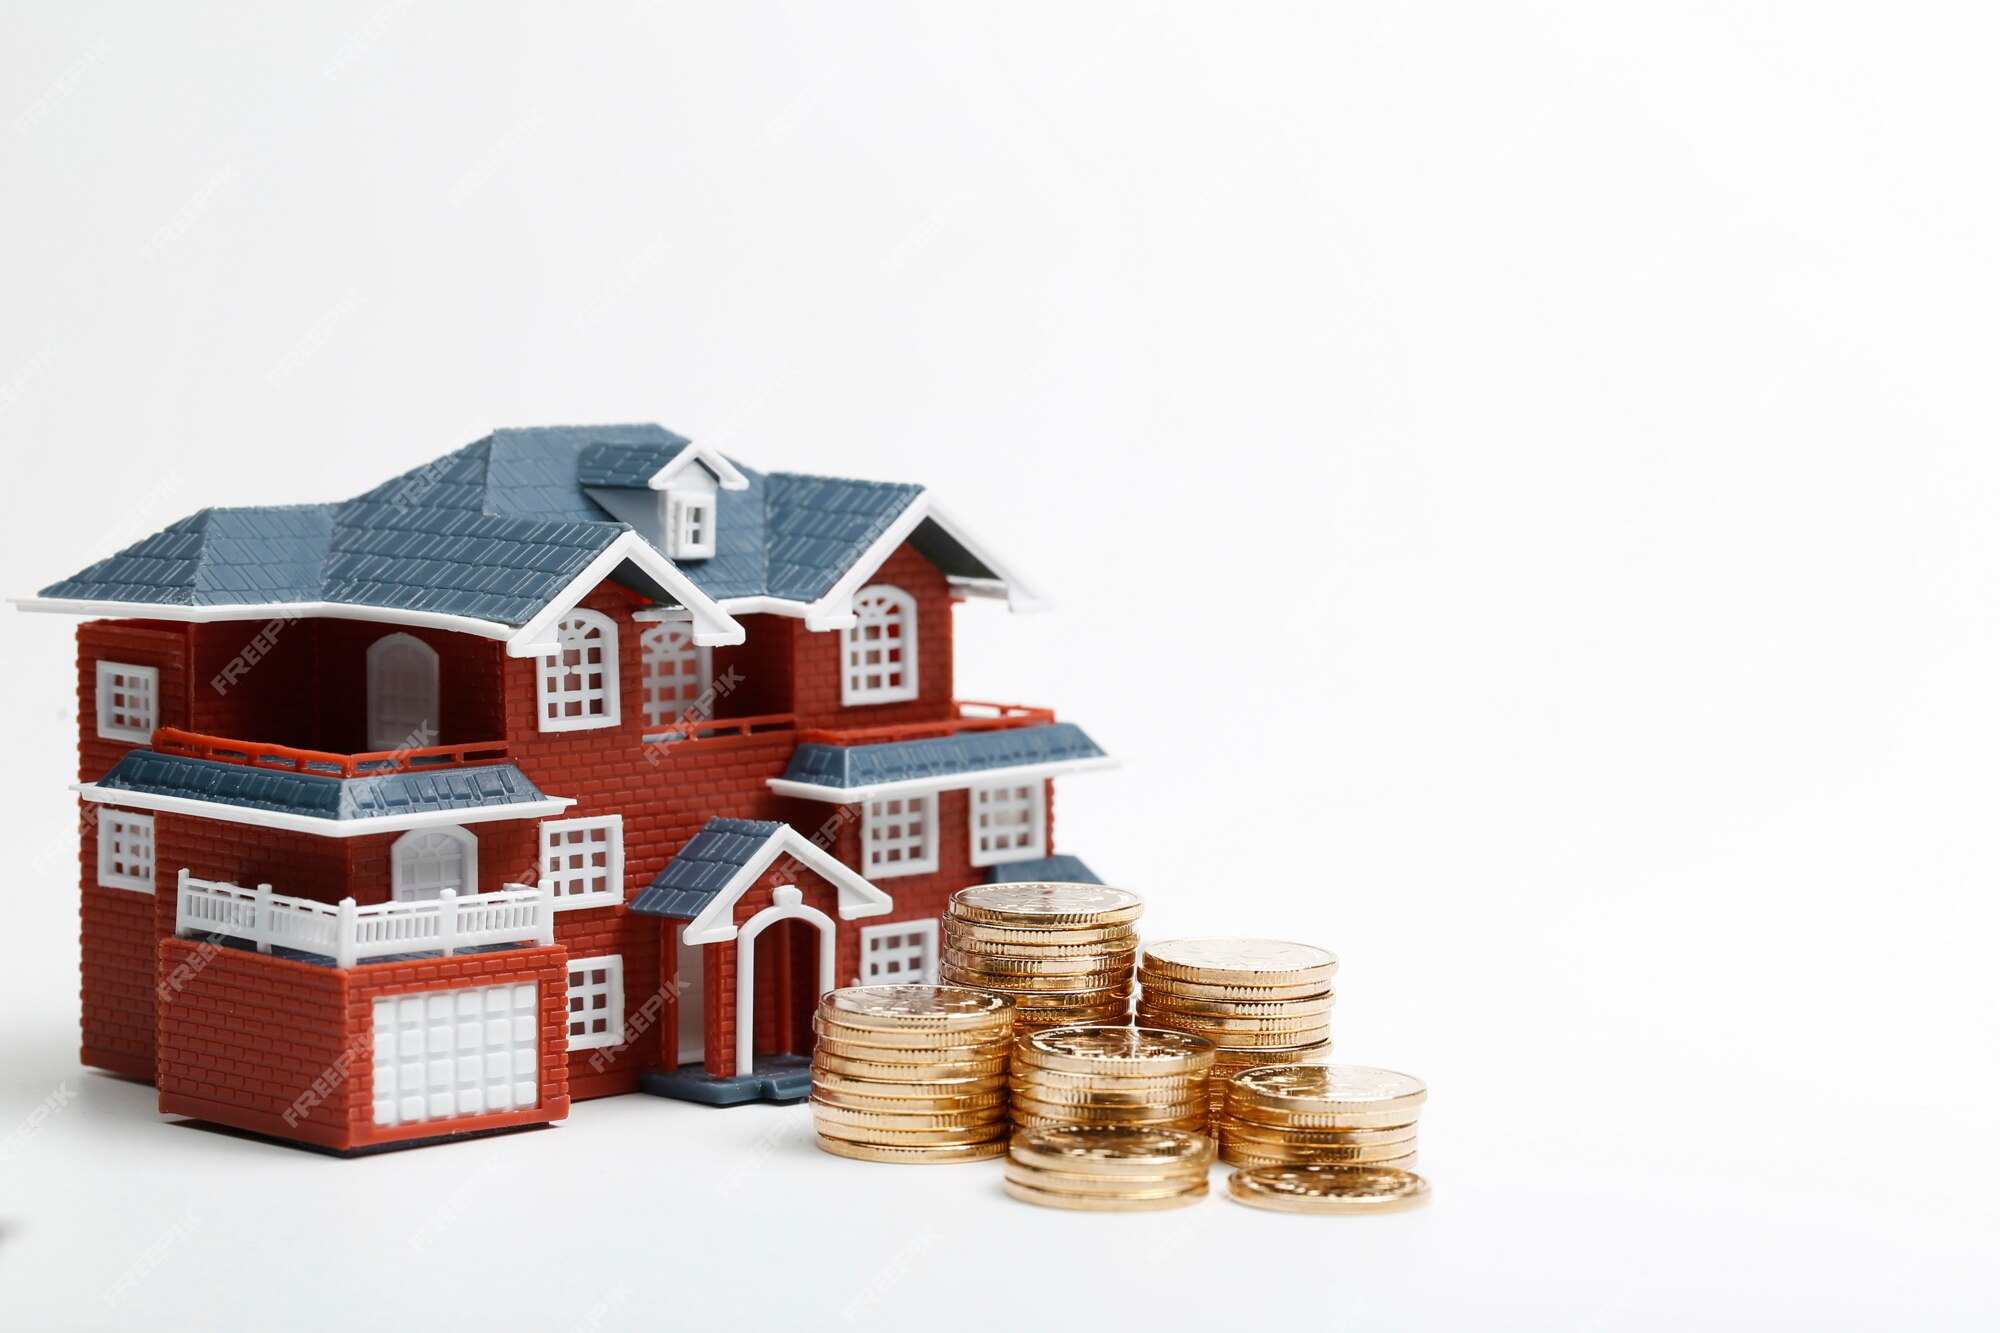 Which is better for purchasing a home: in-house financing, bank financing, or Pag-IBIG financing?